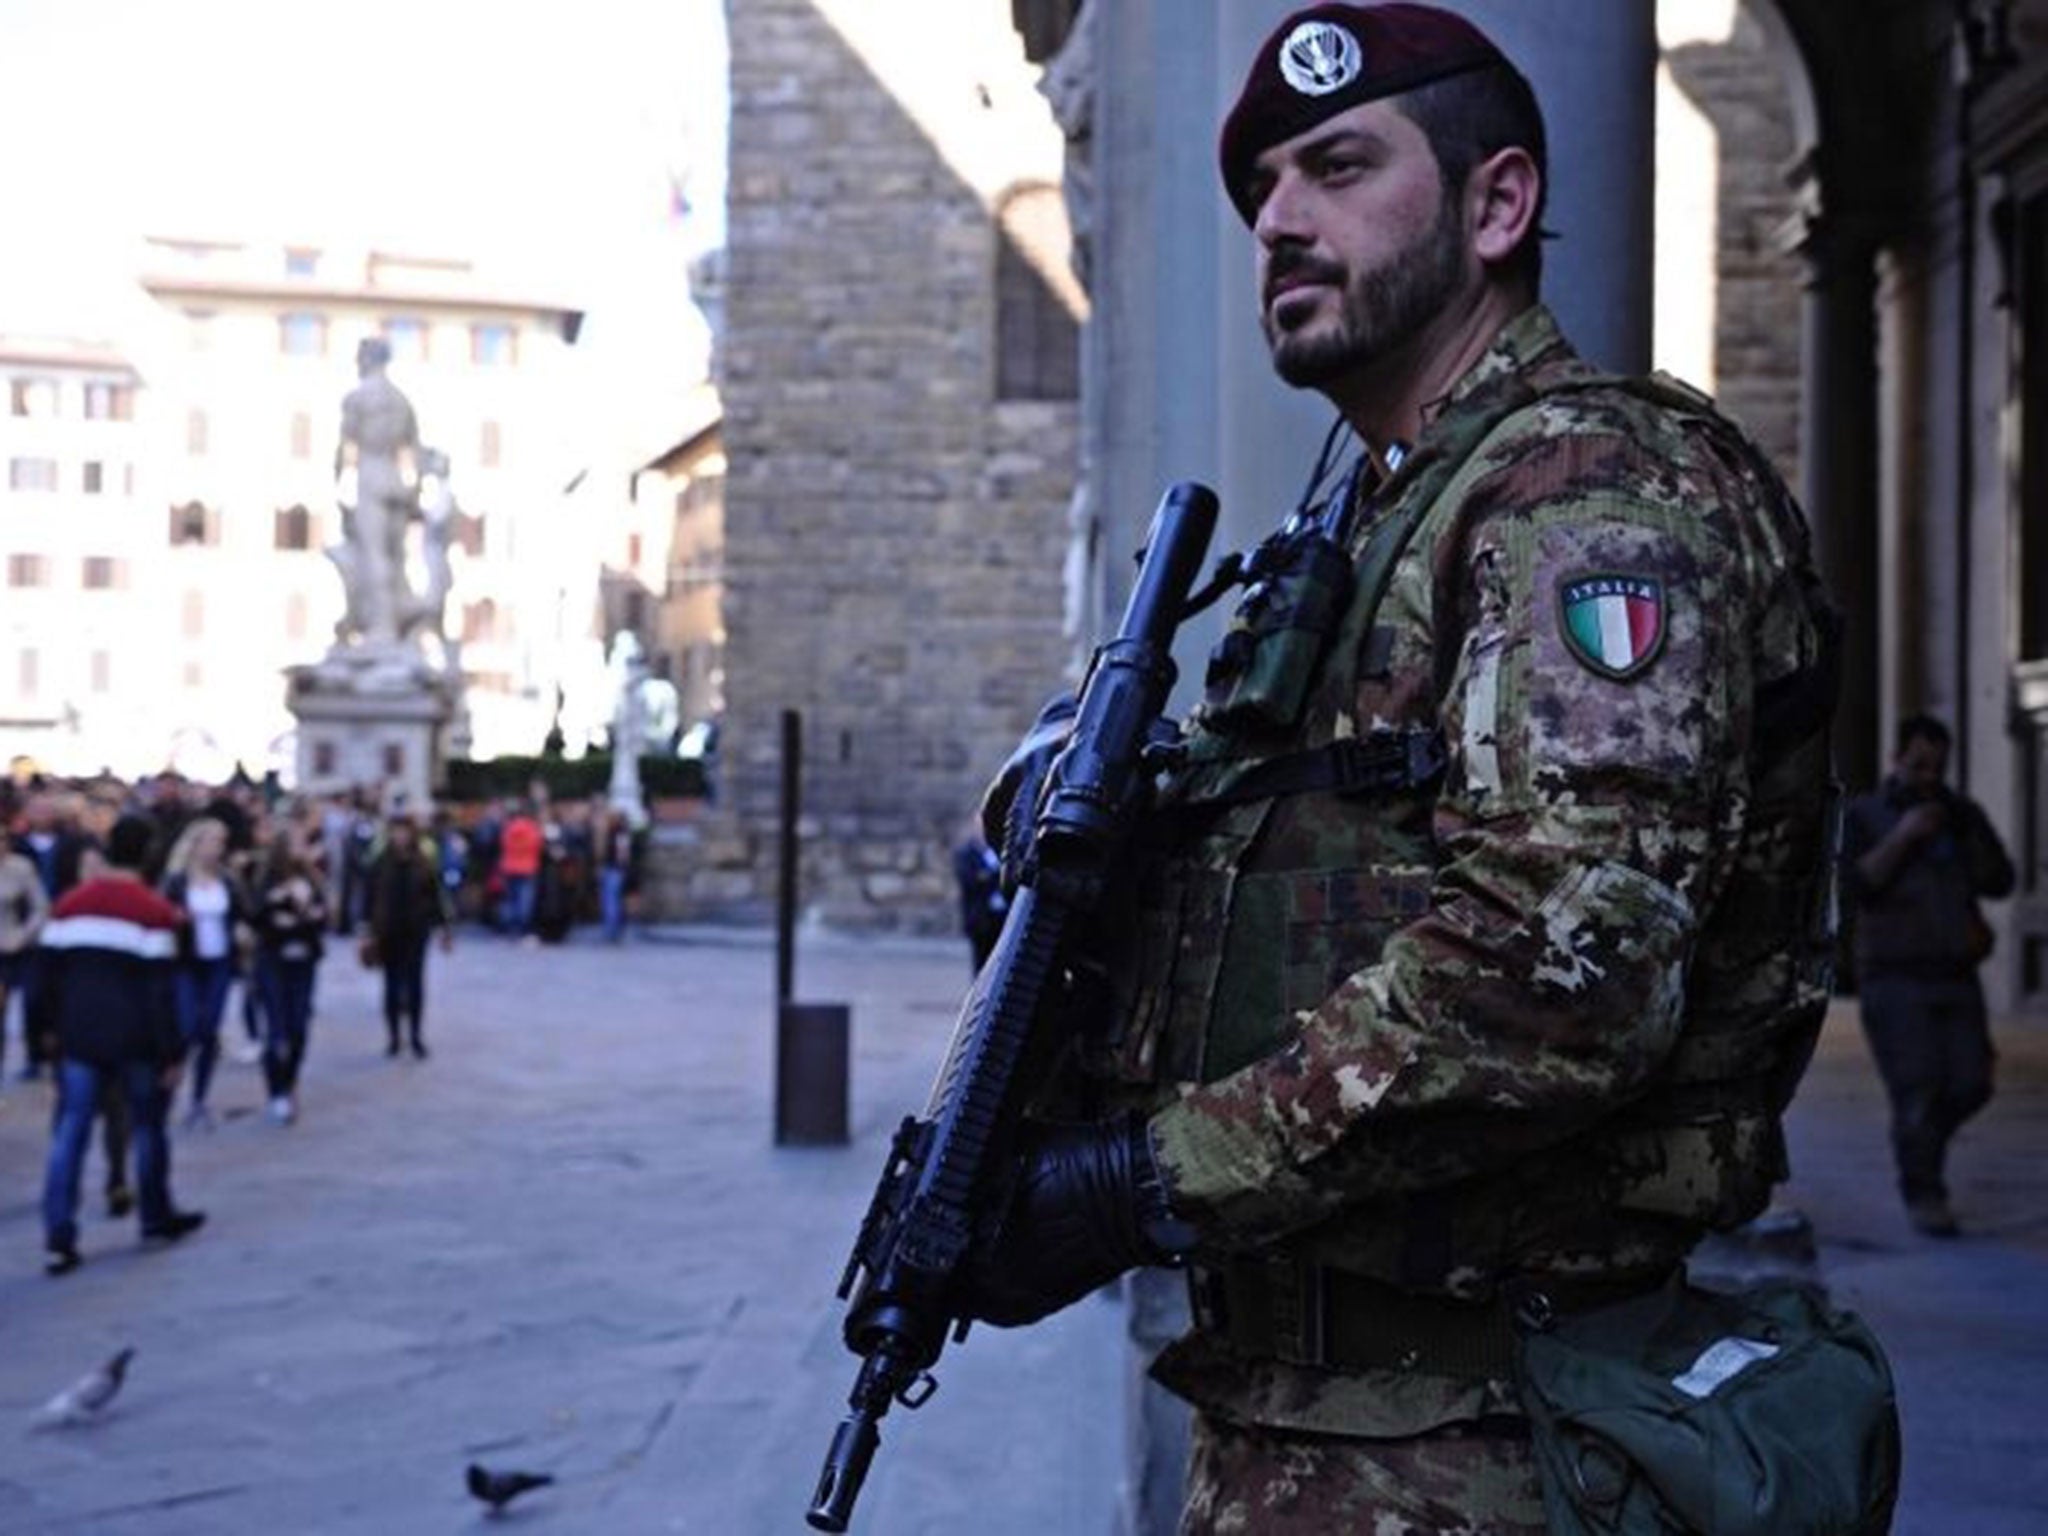 A soldier stands on the Signoria and Uffizi Museum square in Florence, Italy, 25 March, 2016